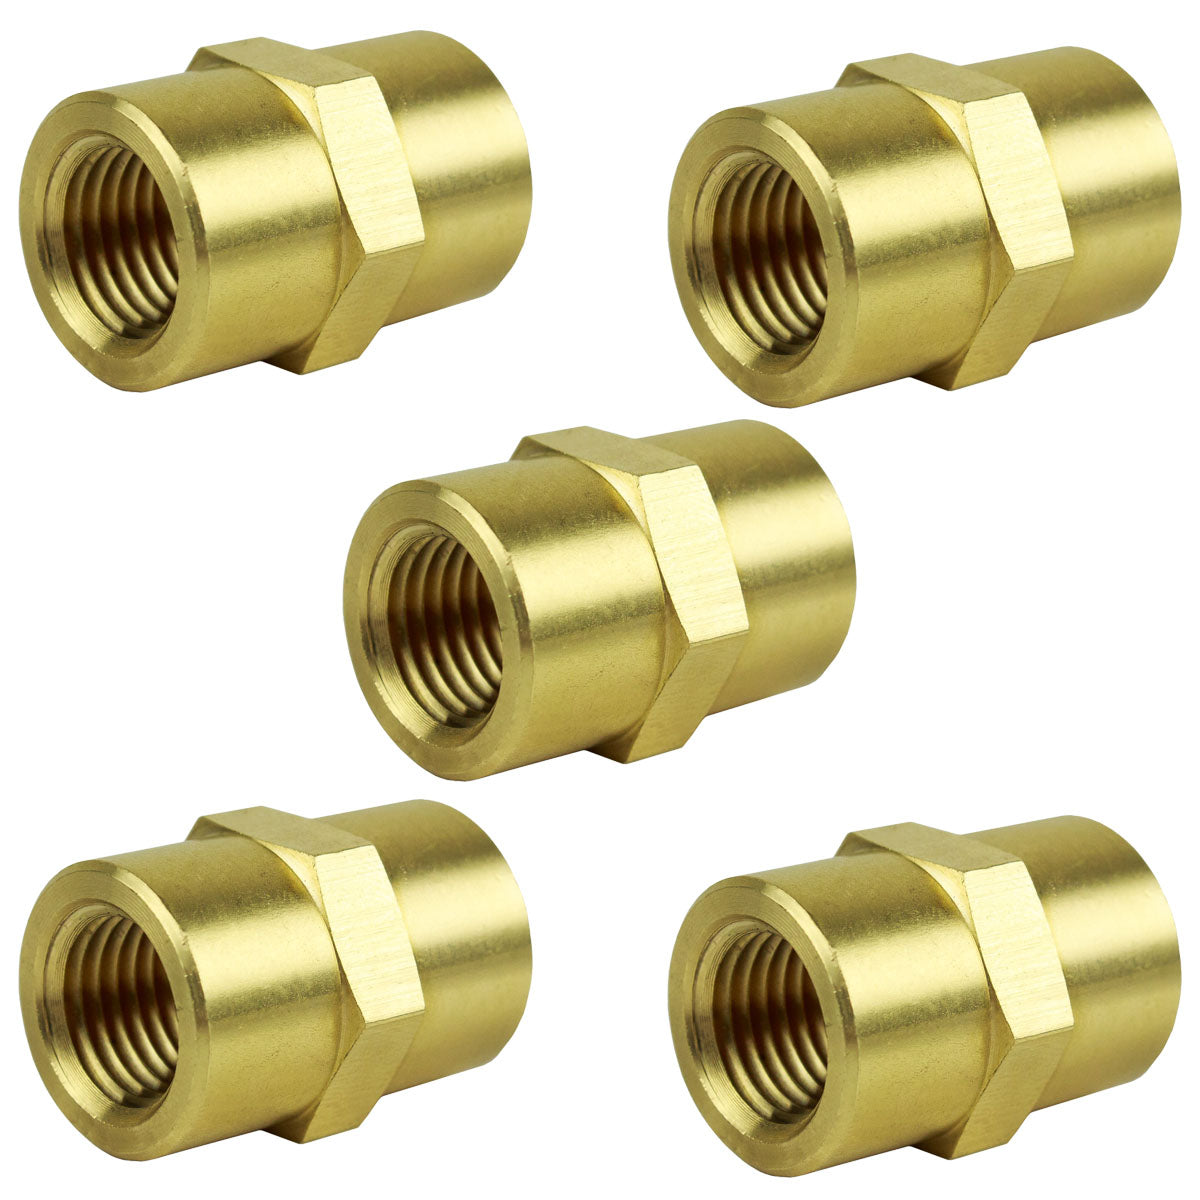 Five 1/4" NPT Female Solid Brass Pipe Unions Adapter Fitting WOG Solid Connector